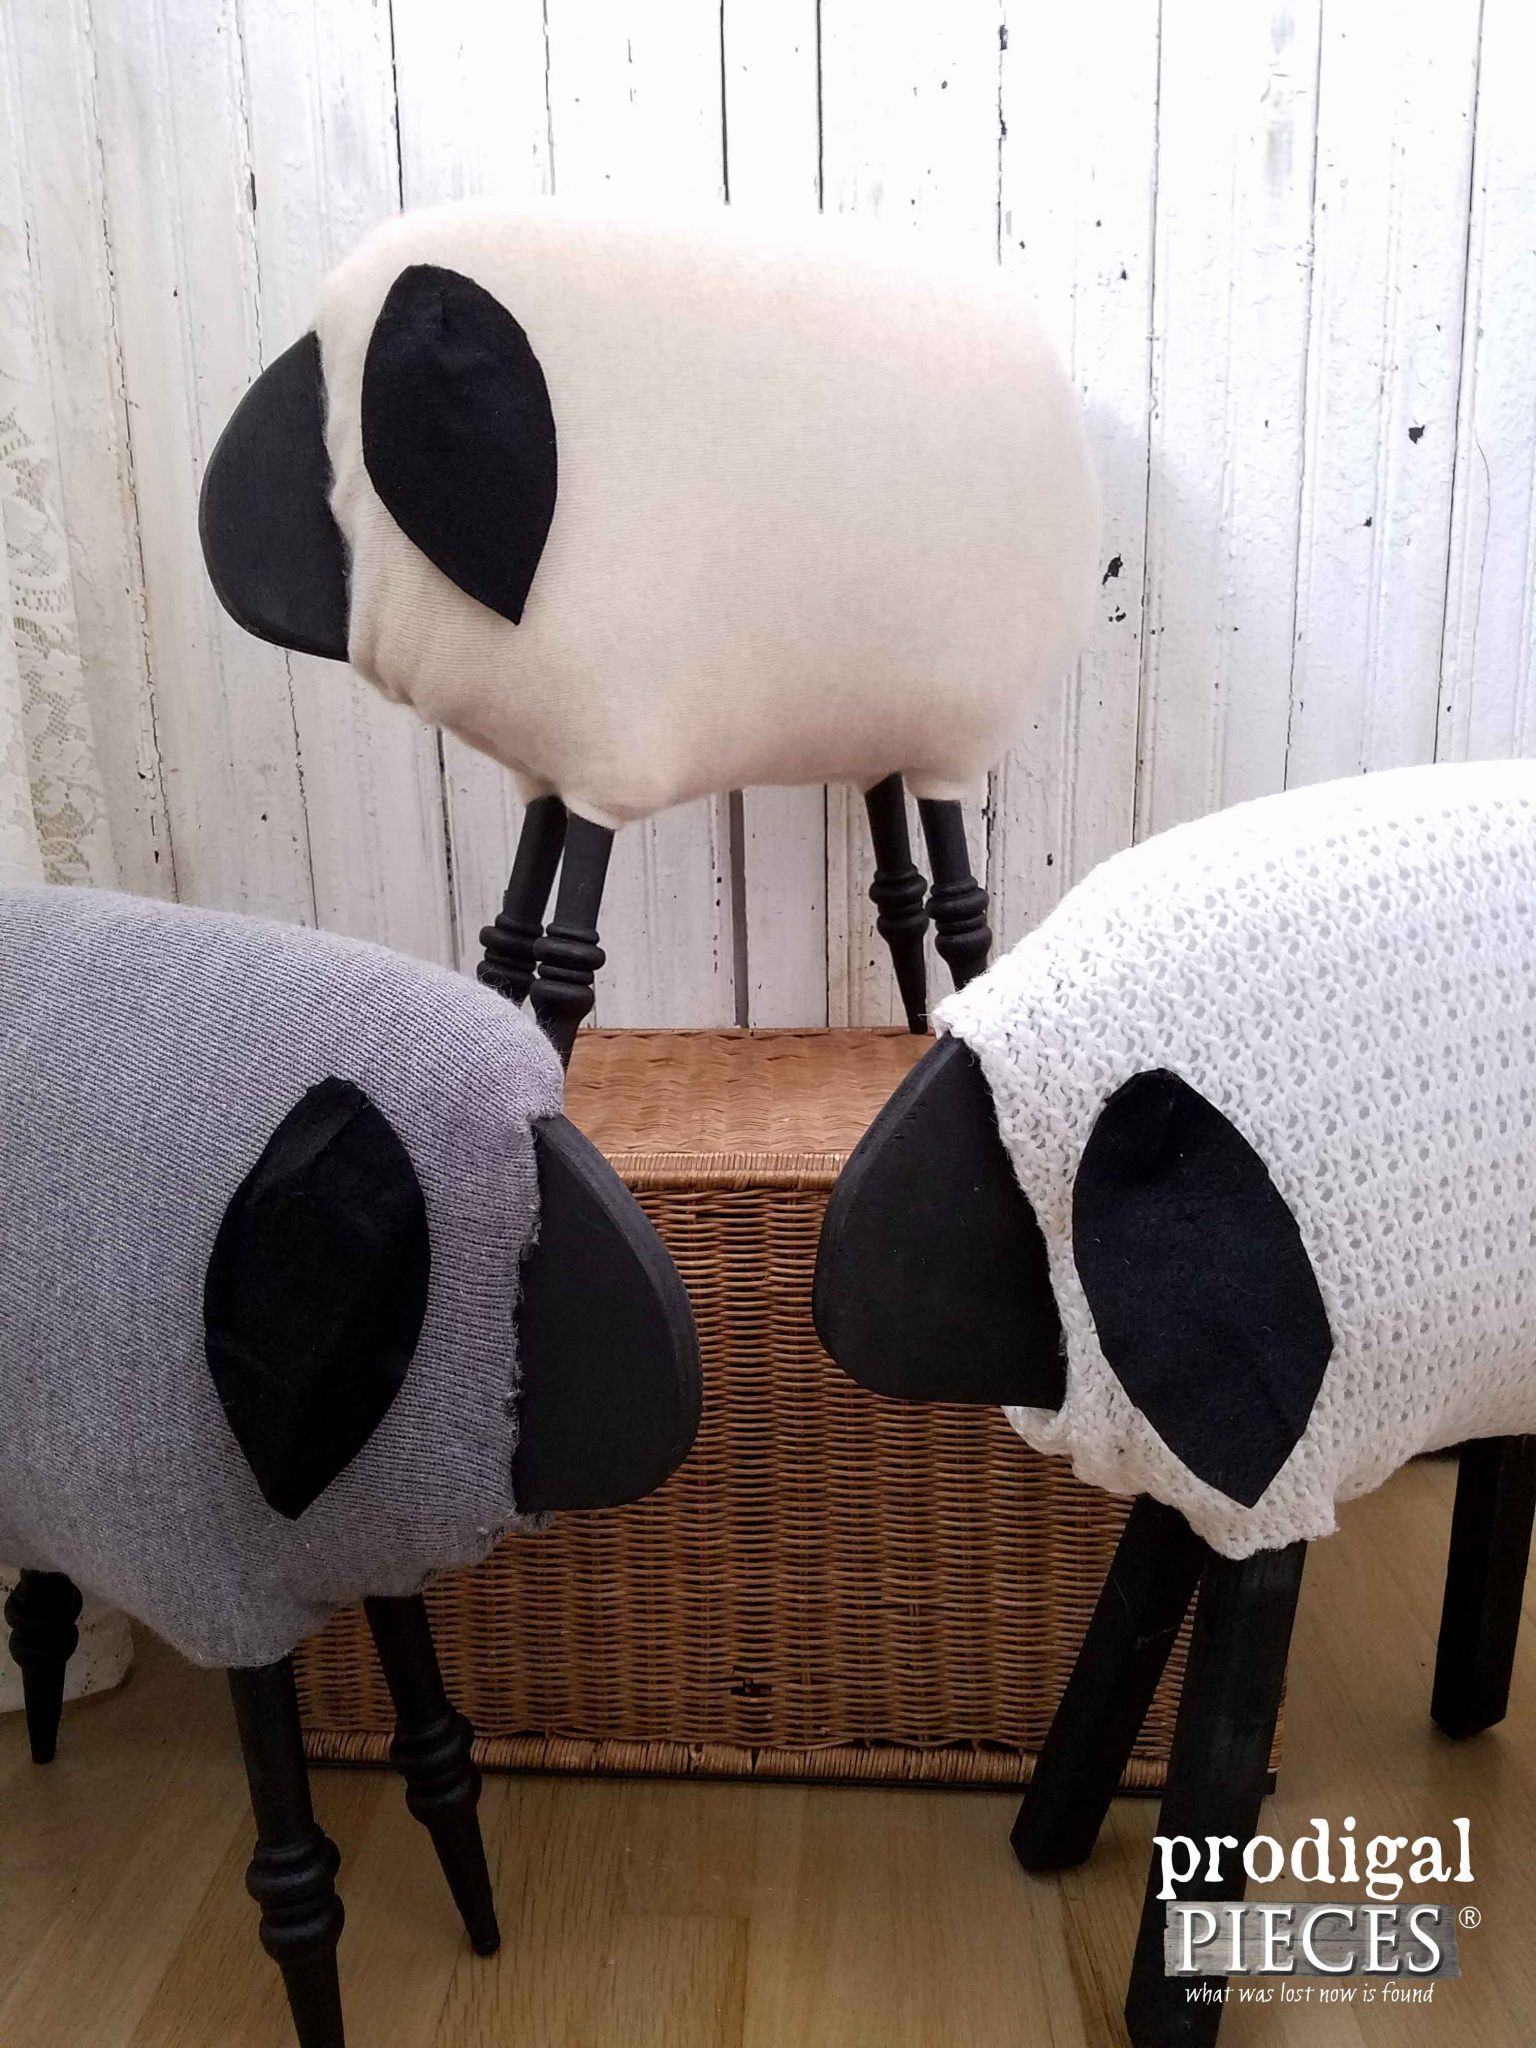 Collection of Repurposed Woolly Sheep by Prodigal Pieces | prodigalpieces.com